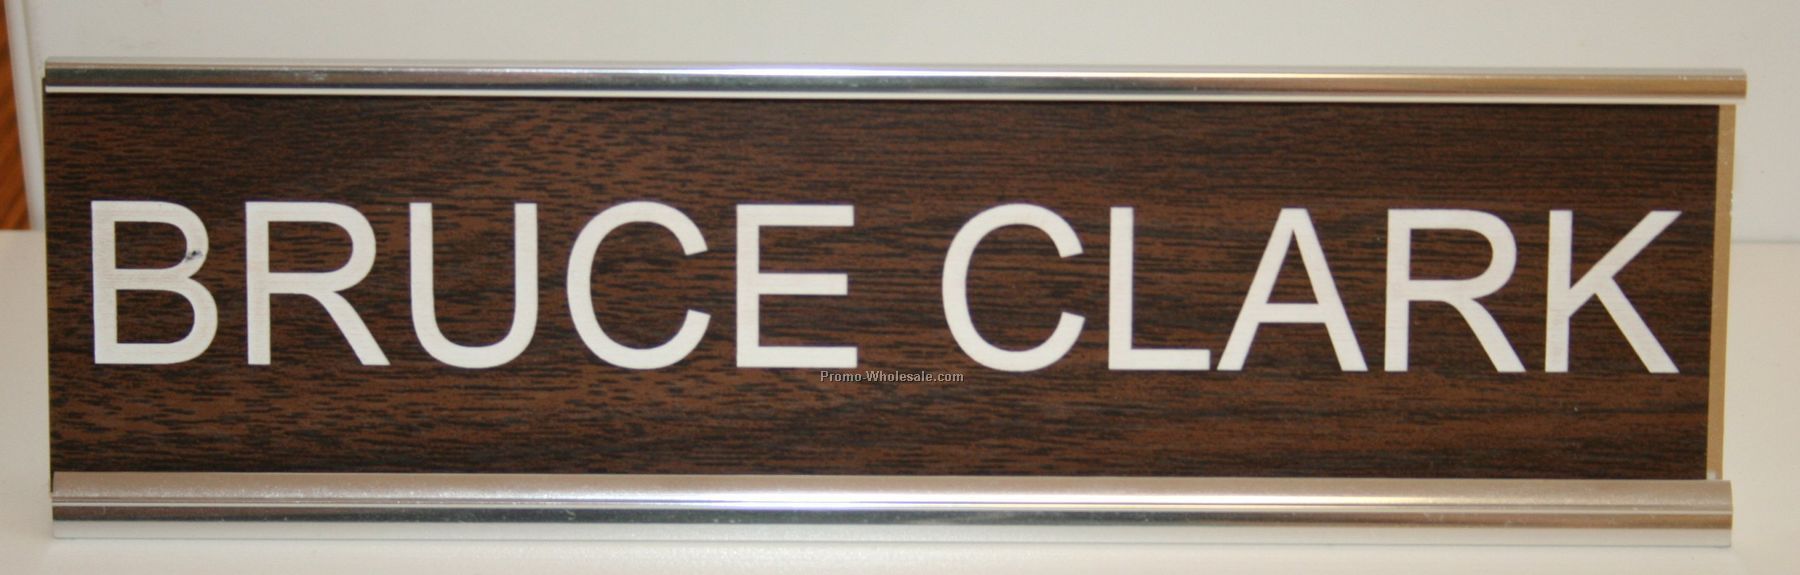 Laser Engraved Name Plate Insert 8"x2"